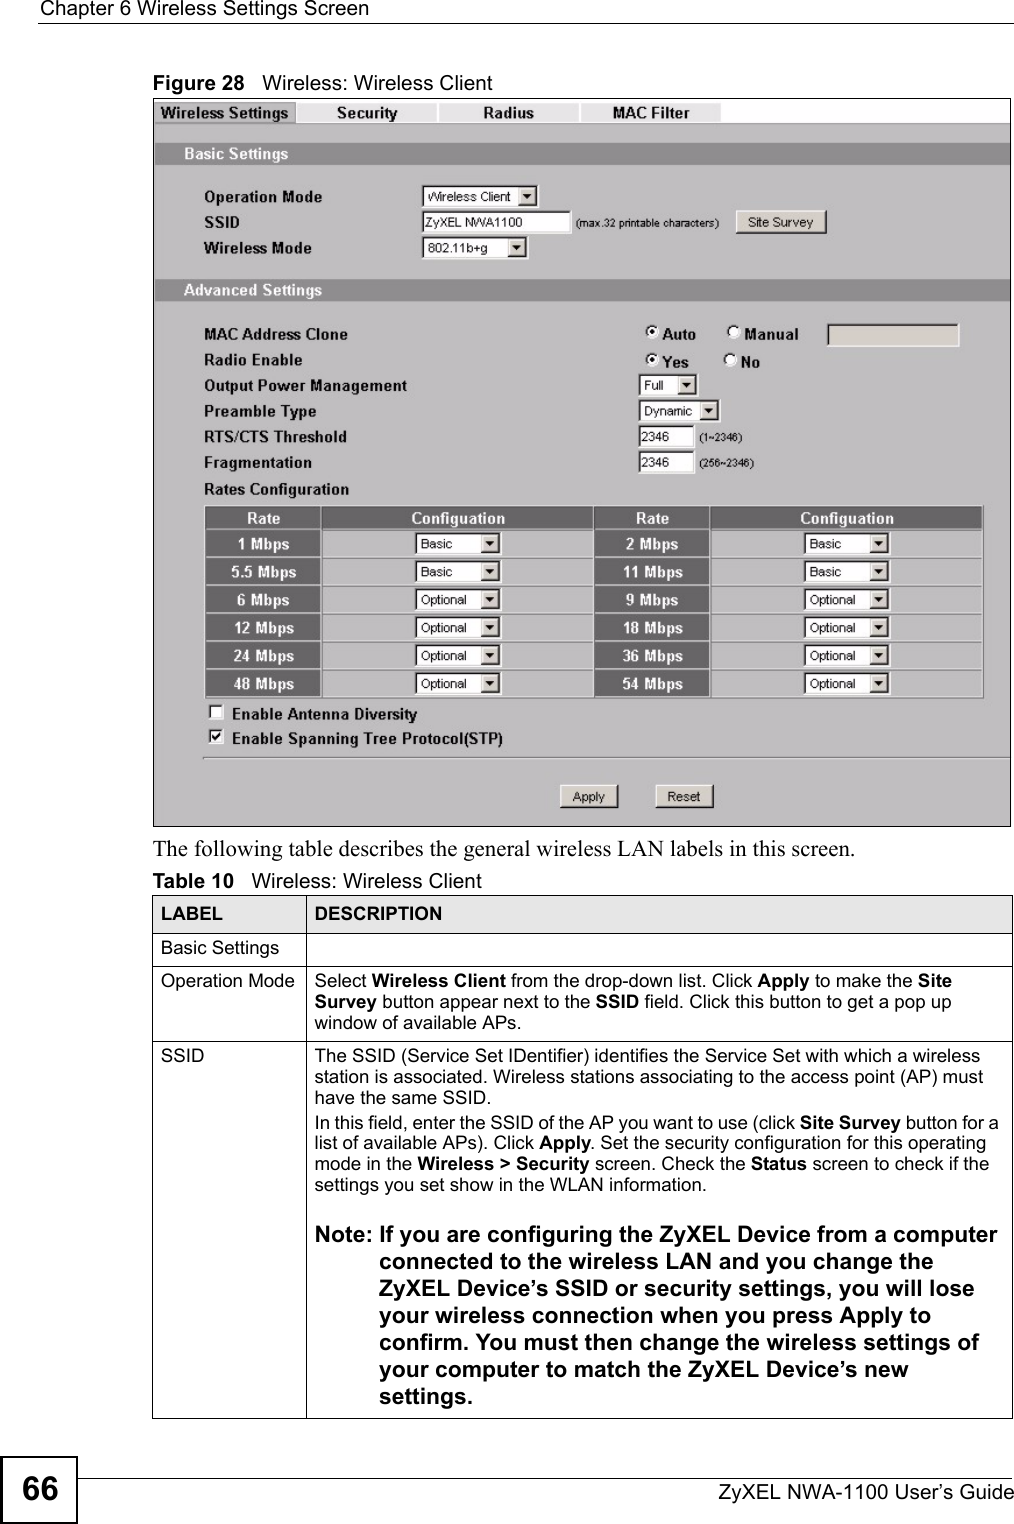 Chapter 6 Wireless Settings ScreenZyXEL NWA-1100 User’s Guide66Figure 28   Wireless: Wireless ClientThe following table describes the general wireless LAN labels in this screen.Table 10   Wireless: Wireless ClientLABEL DESCRIPTIONBasic SettingsOperation Mode Select Wireless Client from the drop-down list. Click Apply to make the Site Survey button appear next to the SSID field. Click this button to get a pop up window of available APs.SSID The SSID (Service Set IDentifier) identifies the Service Set with which a wireless station is associated. Wireless stations associating to the access point (AP) must have the same SSID. In this field, enter the SSID of the AP you want to use (click Site Survey button for a list of available APs). Click Apply. Set the security configuration for this operating mode in the Wireless &gt; Security screen. Check the Status screen to check if the settings you set show in the WLAN information.Note: If you are configuring the ZyXEL Device from a computer connected to the wireless LAN and you change the ZyXEL Device’s SSID or security settings, you will lose your wireless connection when you press Apply to confirm. You must then change the wireless settings of your computer to match the ZyXEL Device’s new settings.